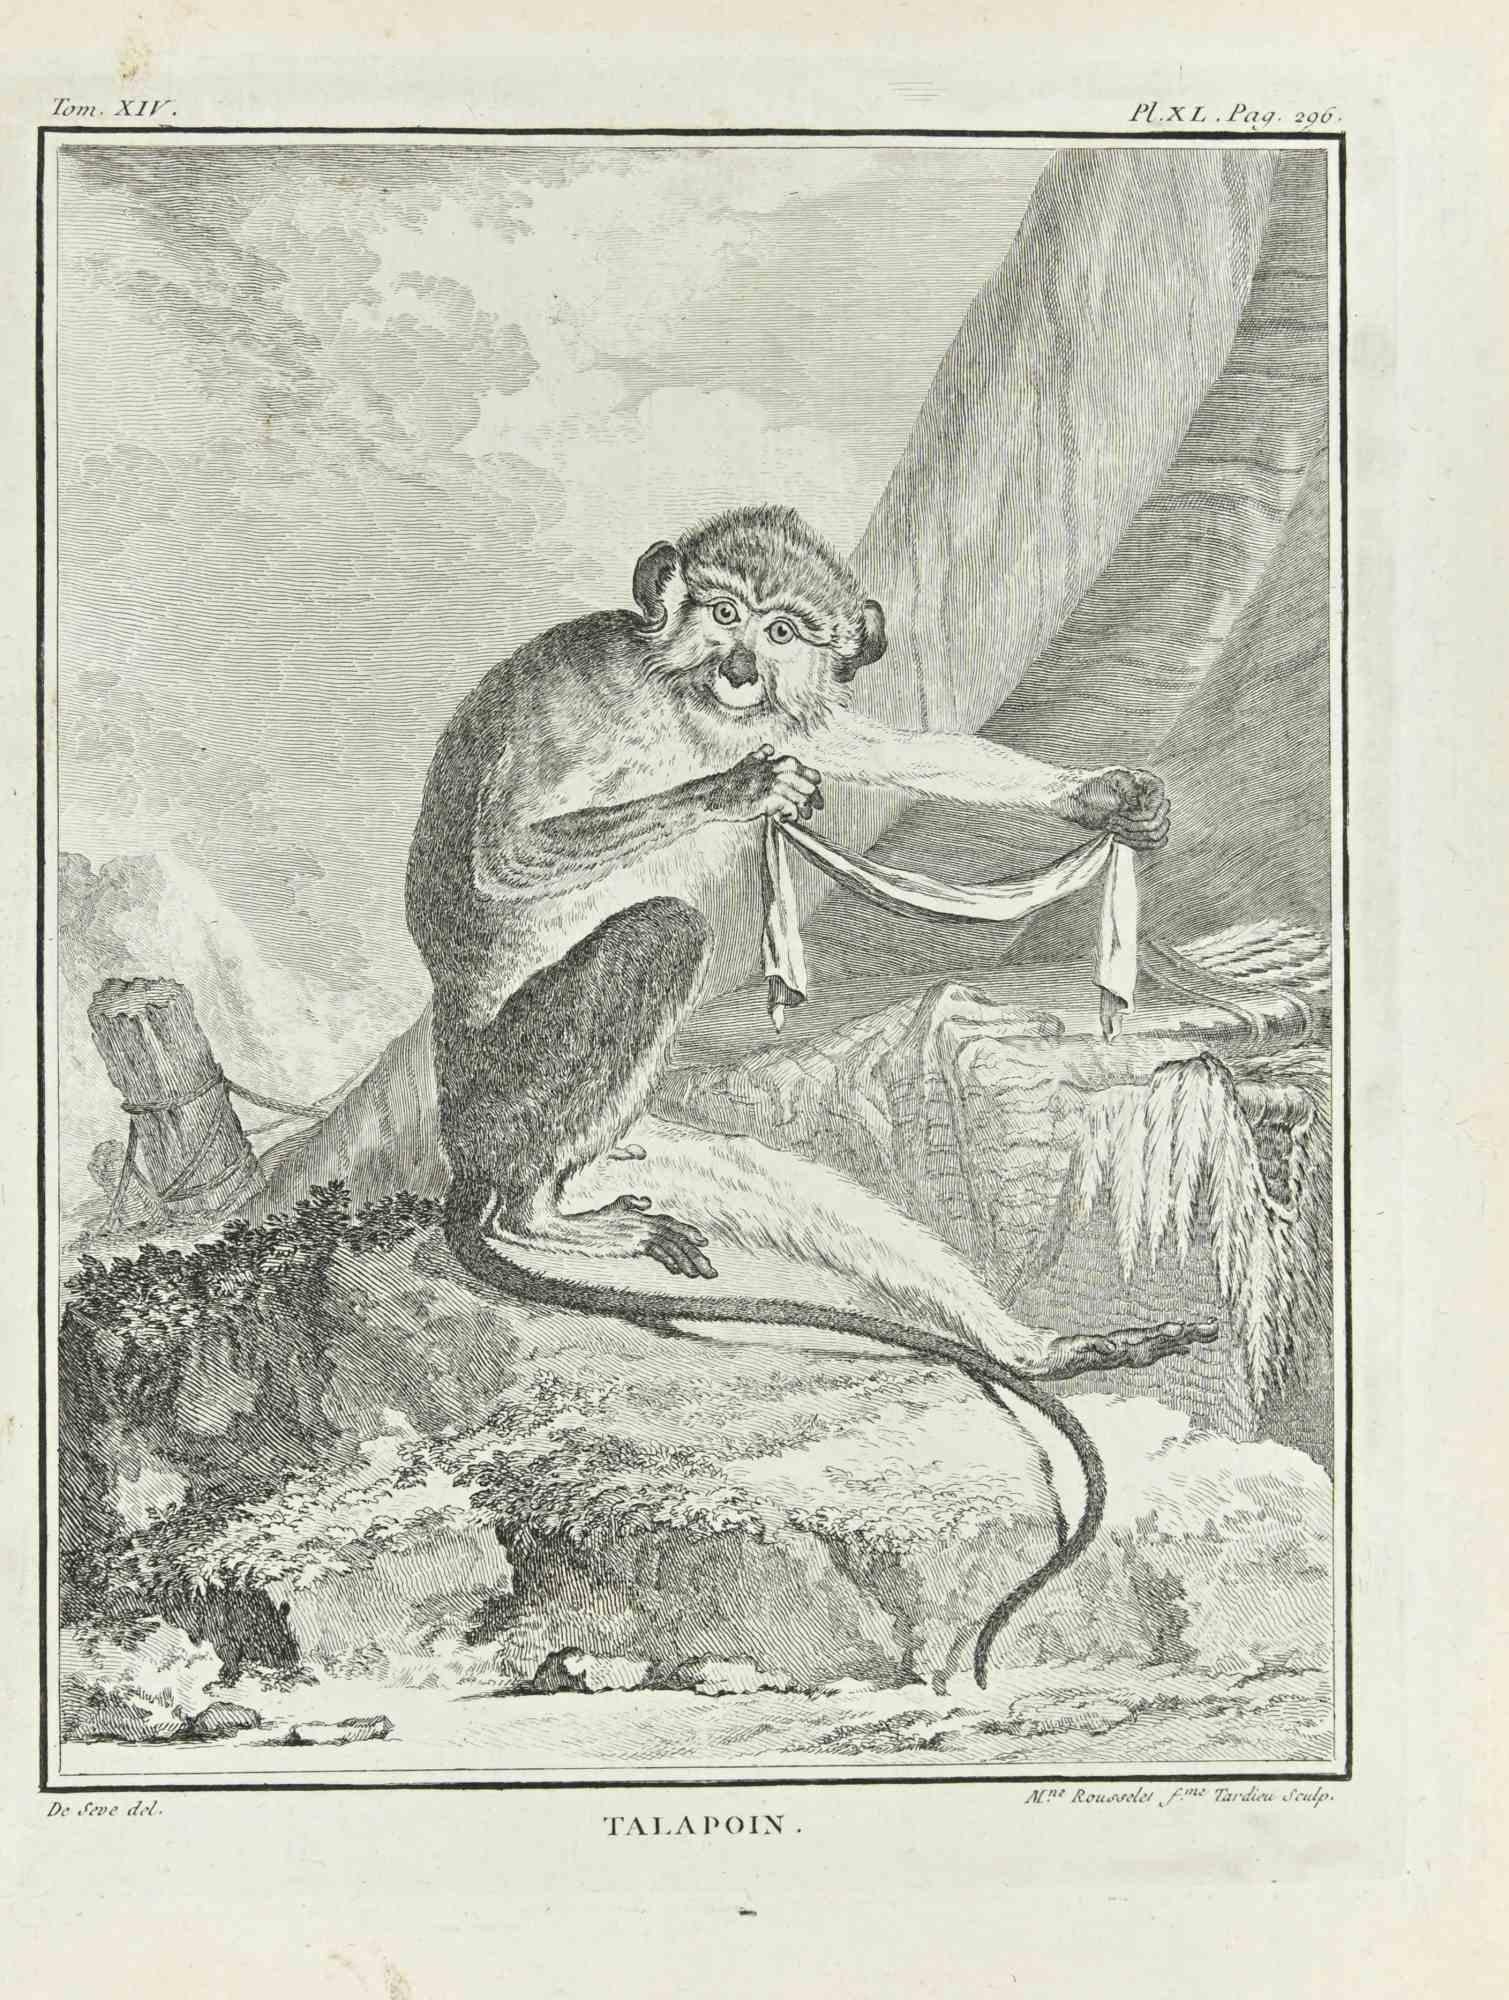 Talapoin is an etching realized by Juste Madeline Rousselet in 1771.

It belongs to the suite "Histoire Naturelle de Buffon".

The Artist's signature is engraved lower right.

Good conditions